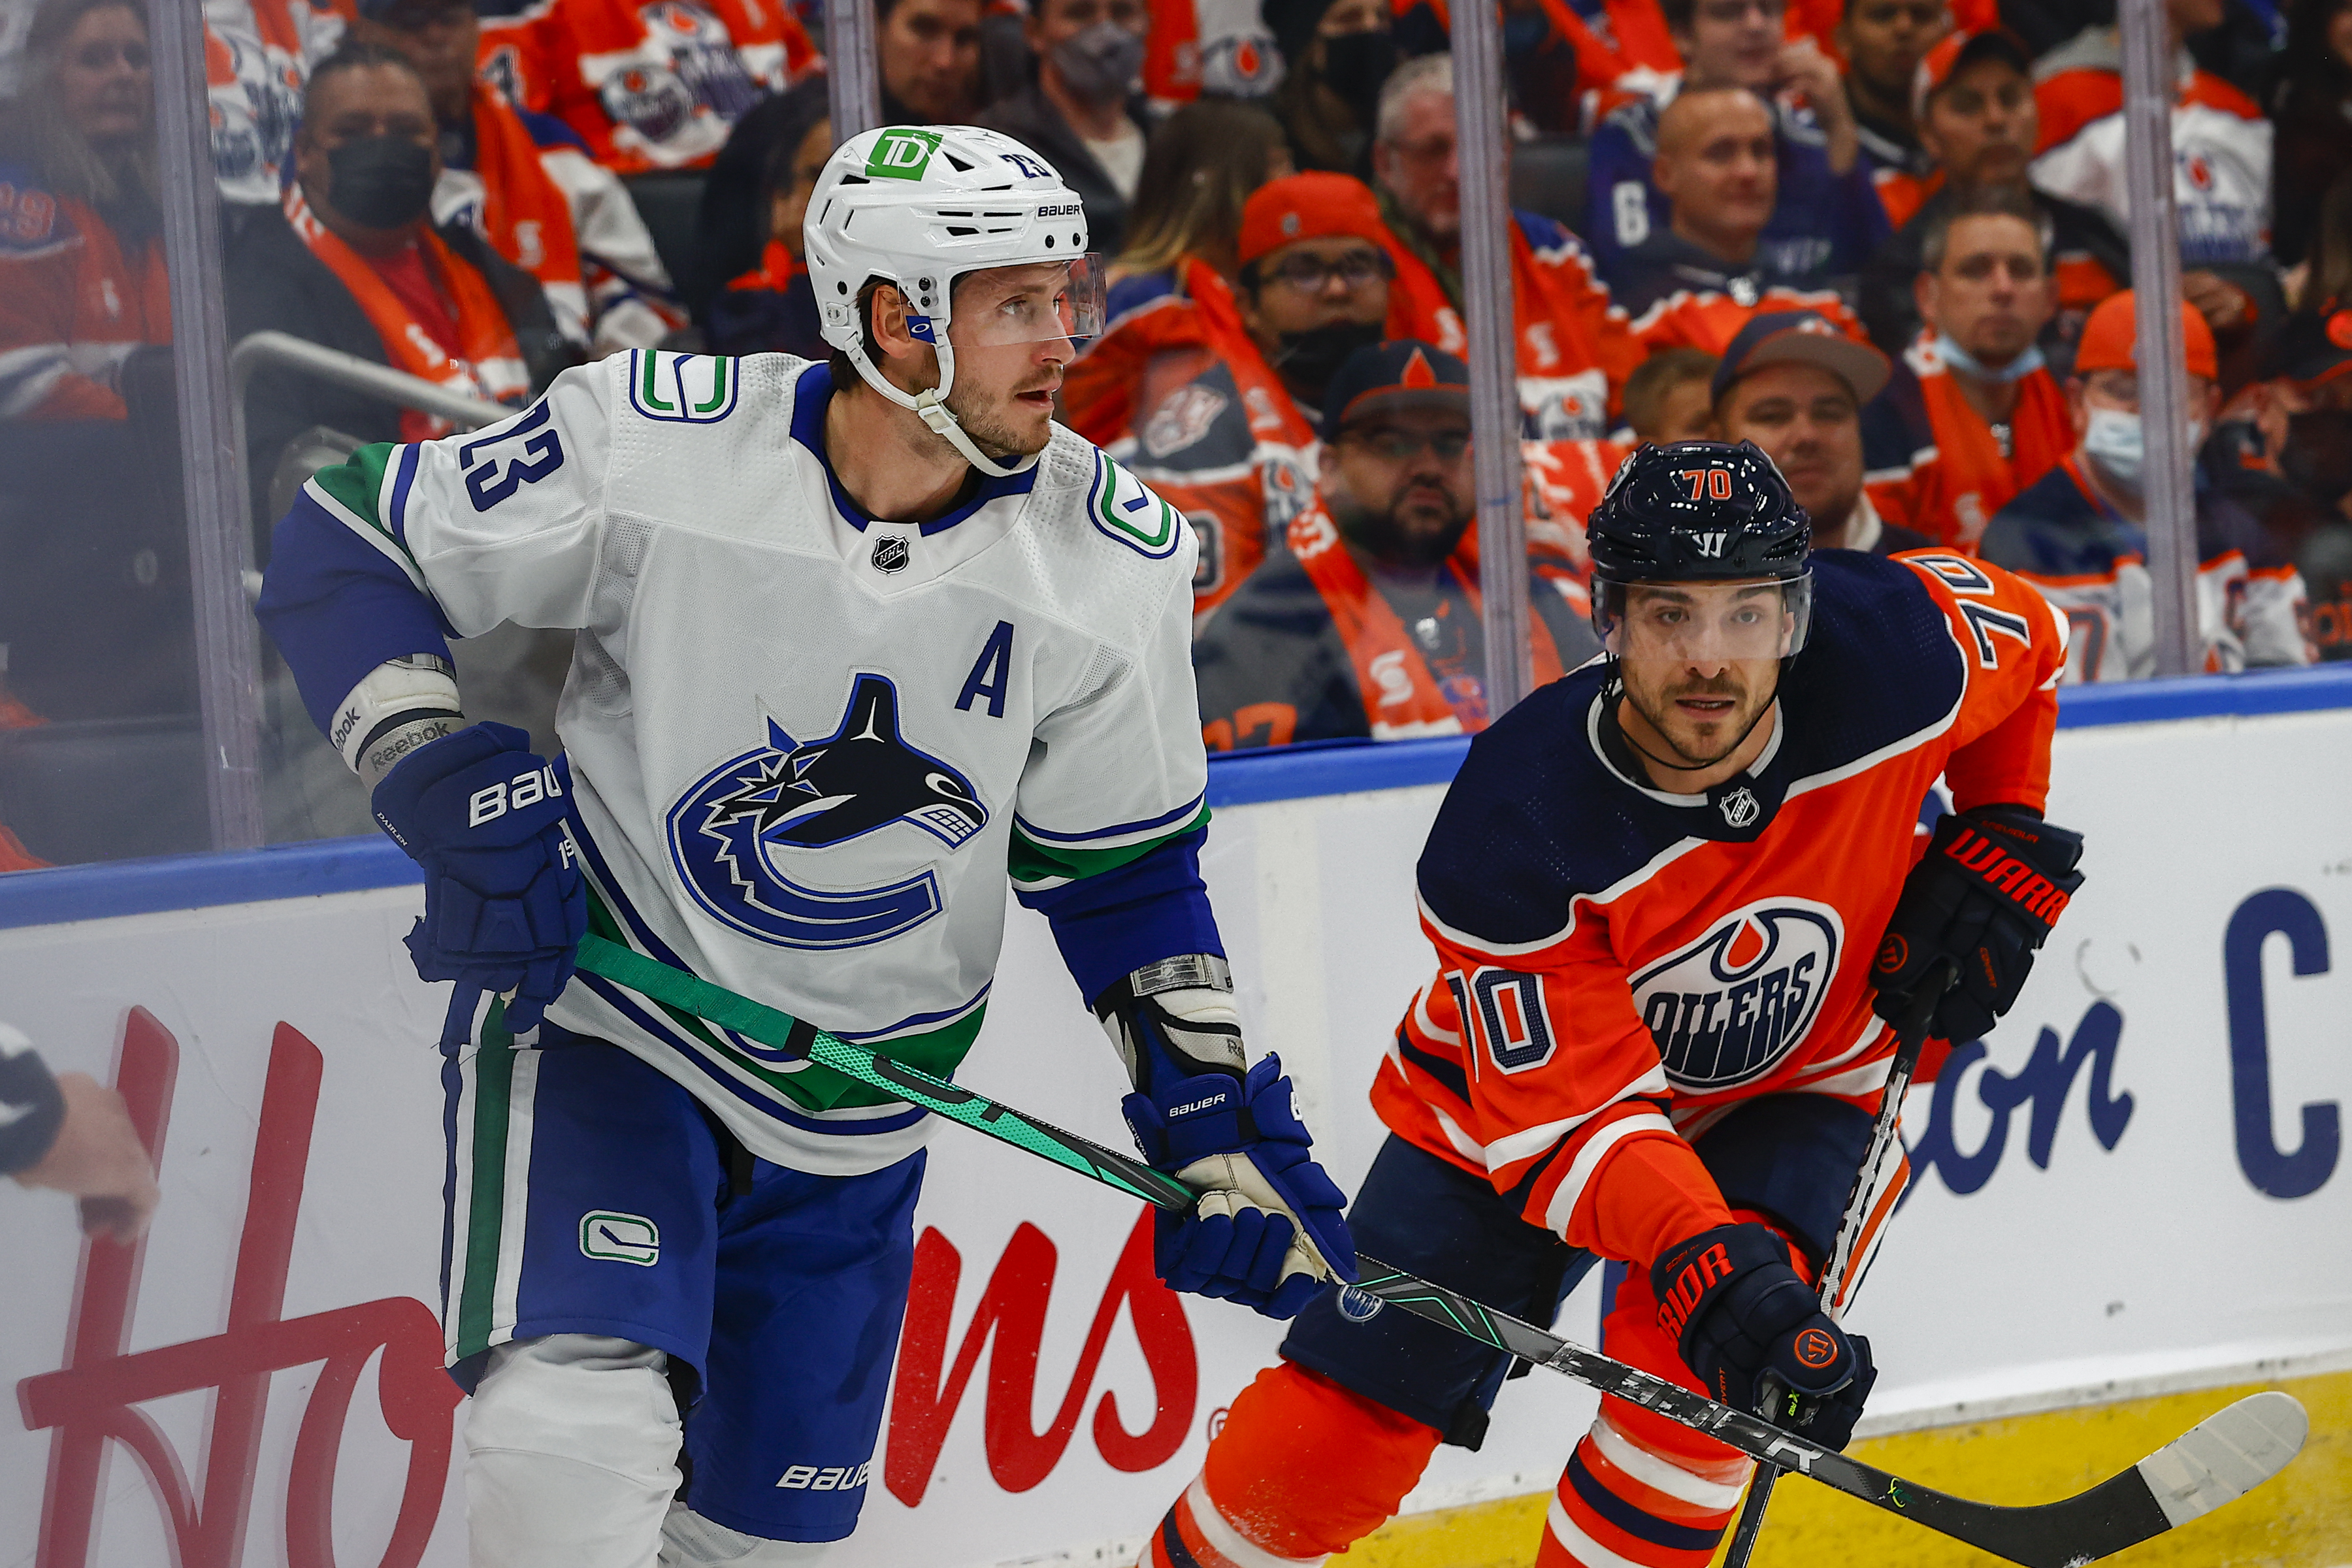 NHL: OCT 13 Canucks at Oilers